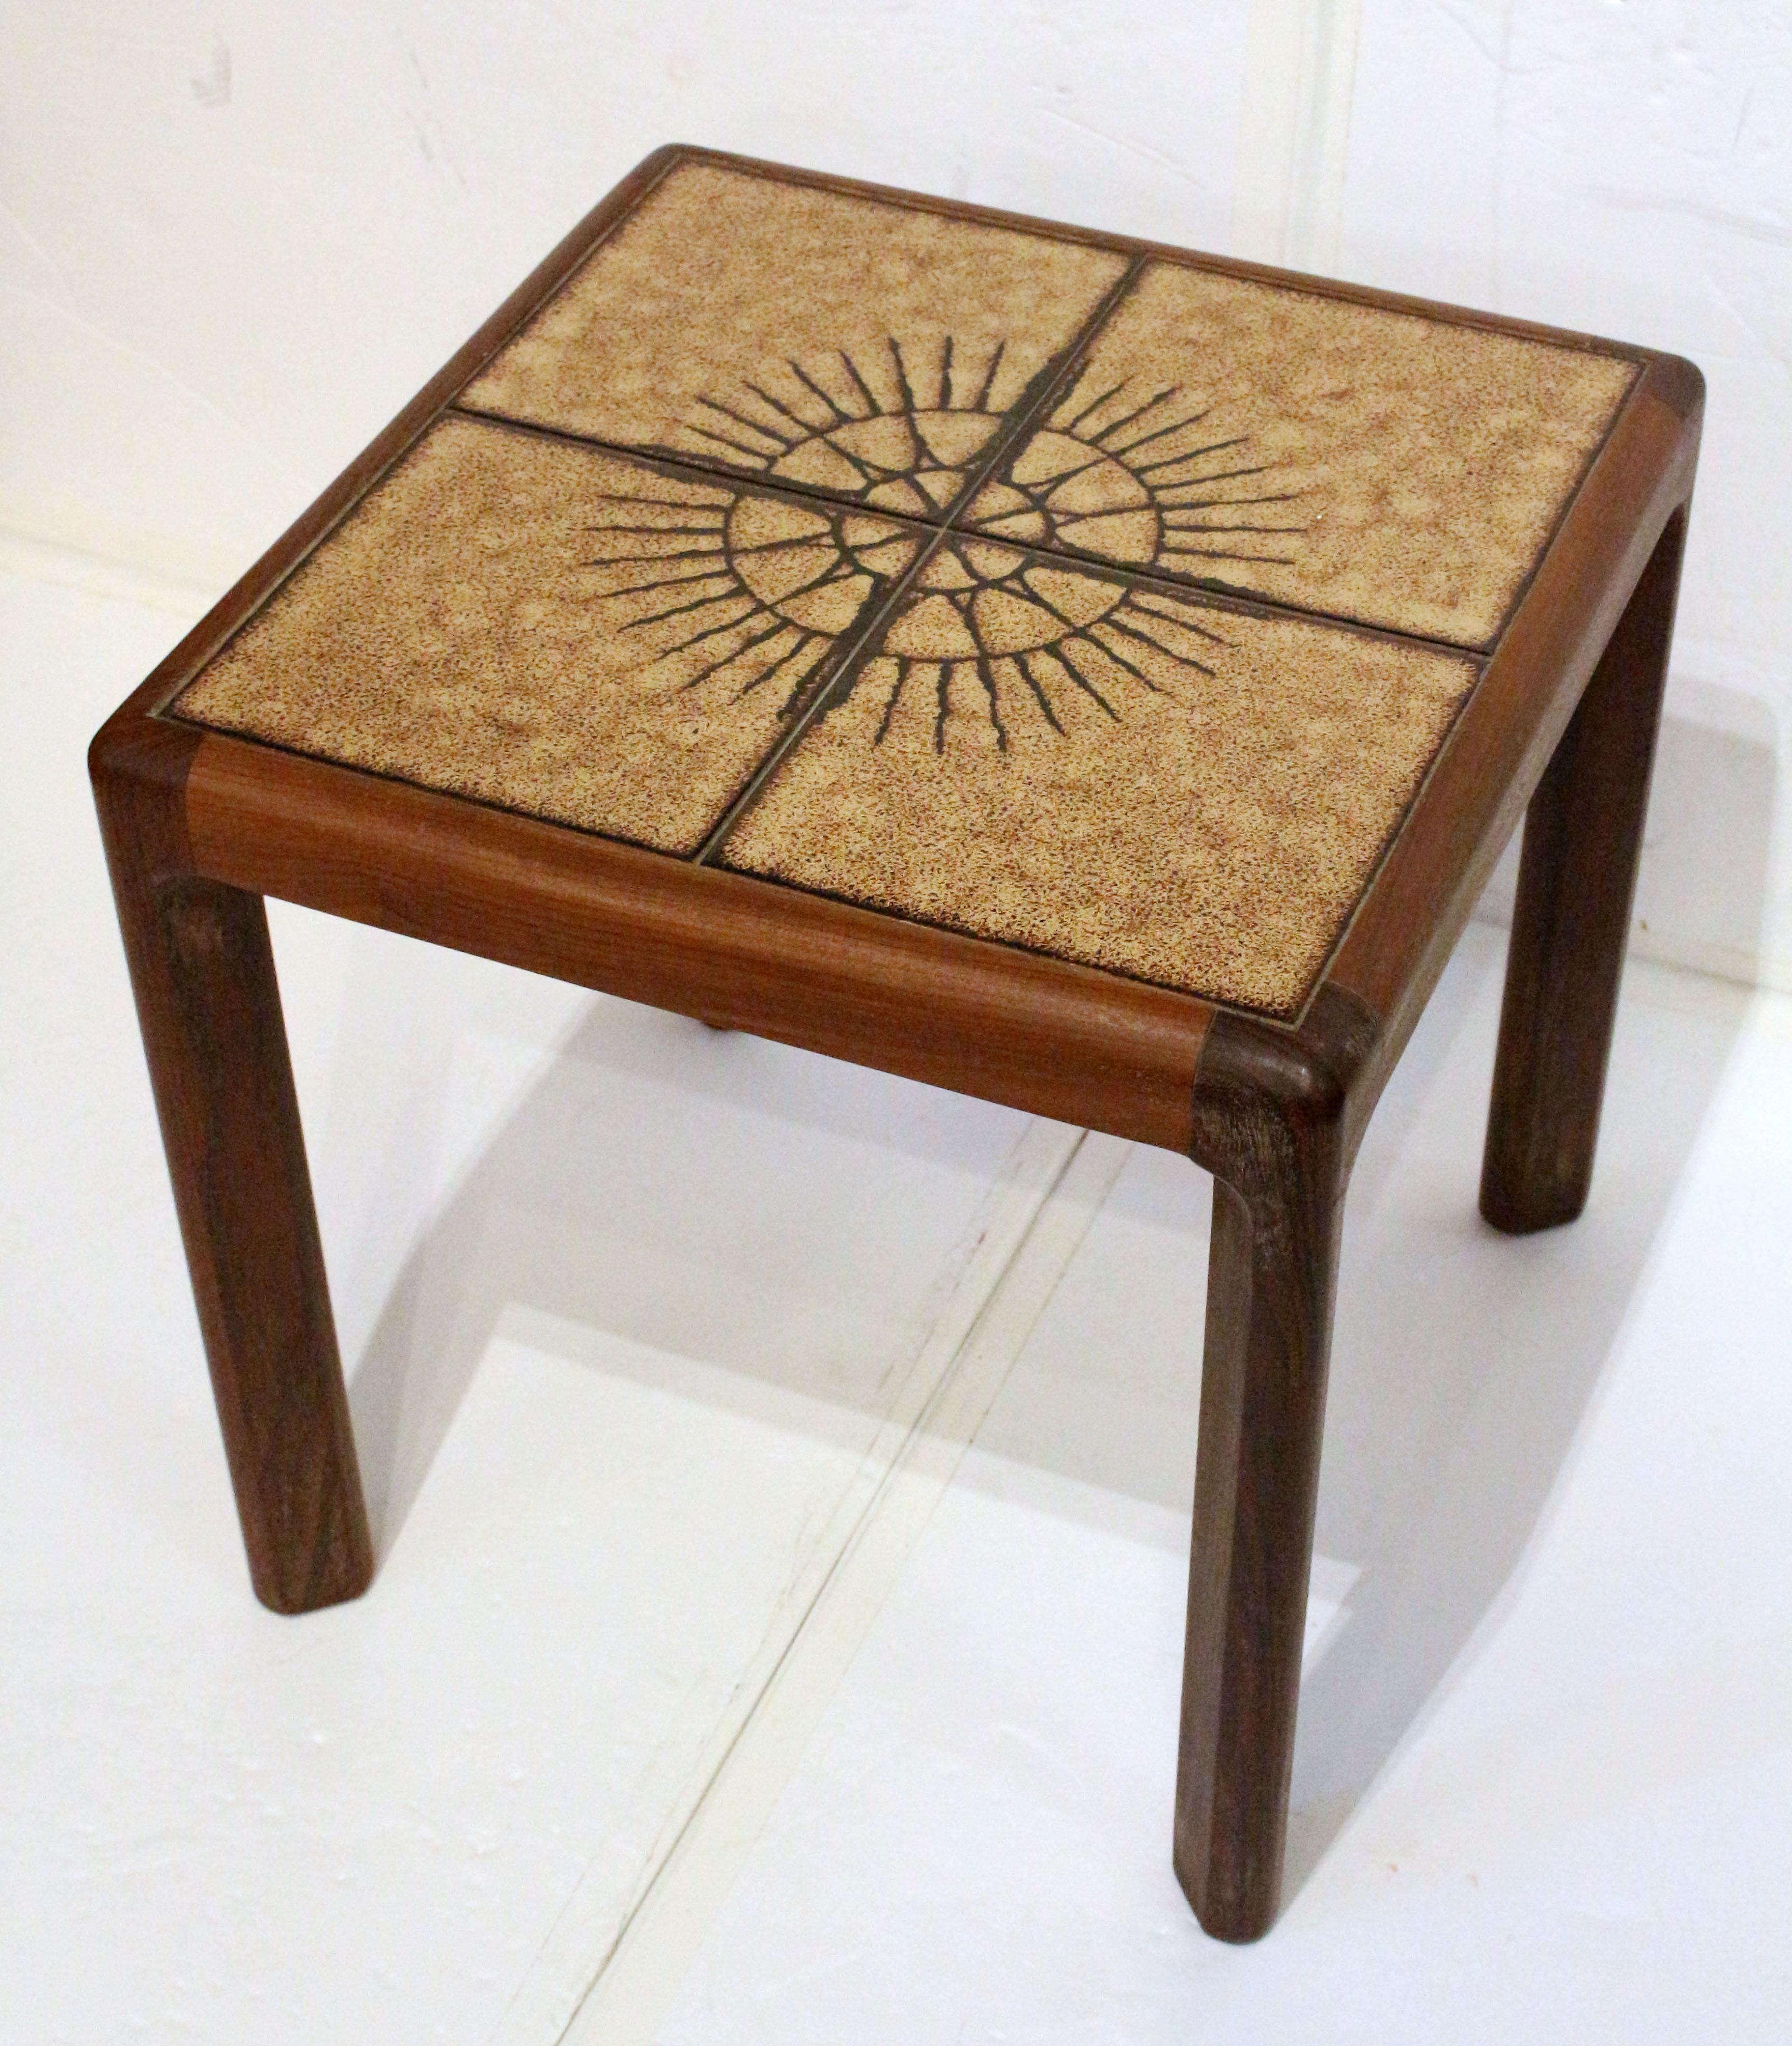 Mid century modern tile top side table. The beige & black tiles forming a sunburst. Stylish wooden table structure. 17 1/4